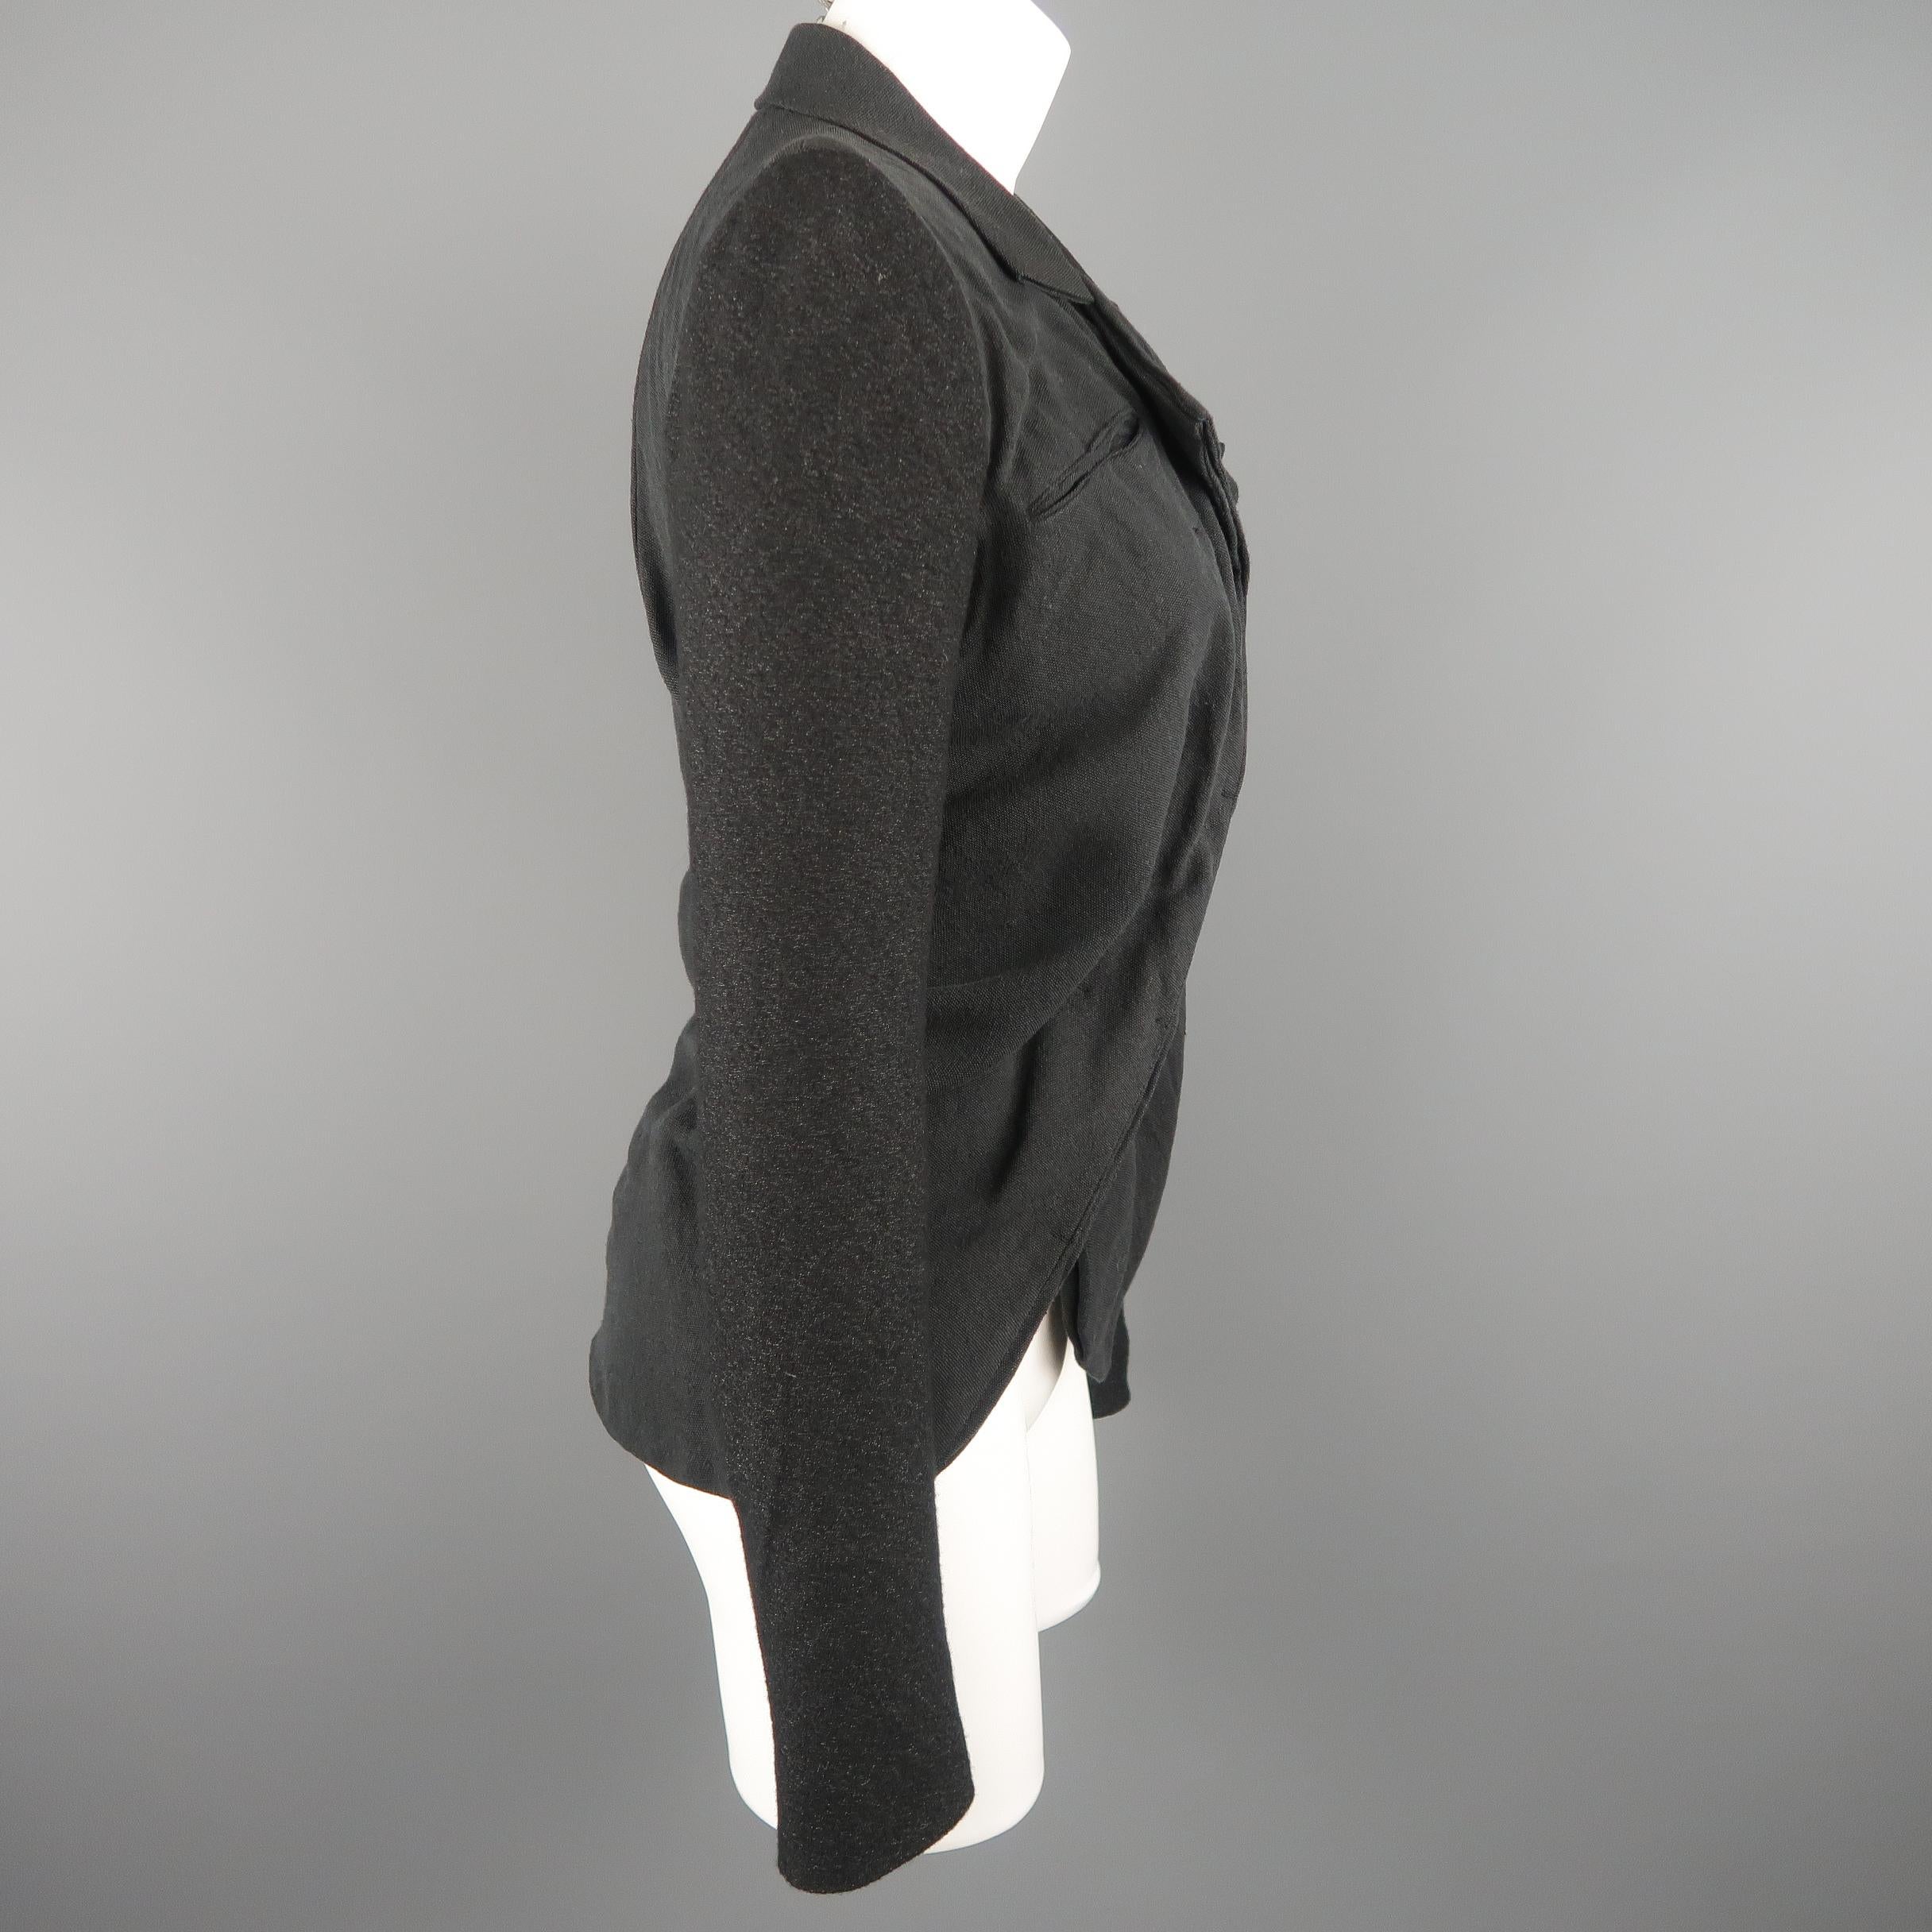 LOST & FOUND Size S Charcoal & Black Ruched Body Jacket 2